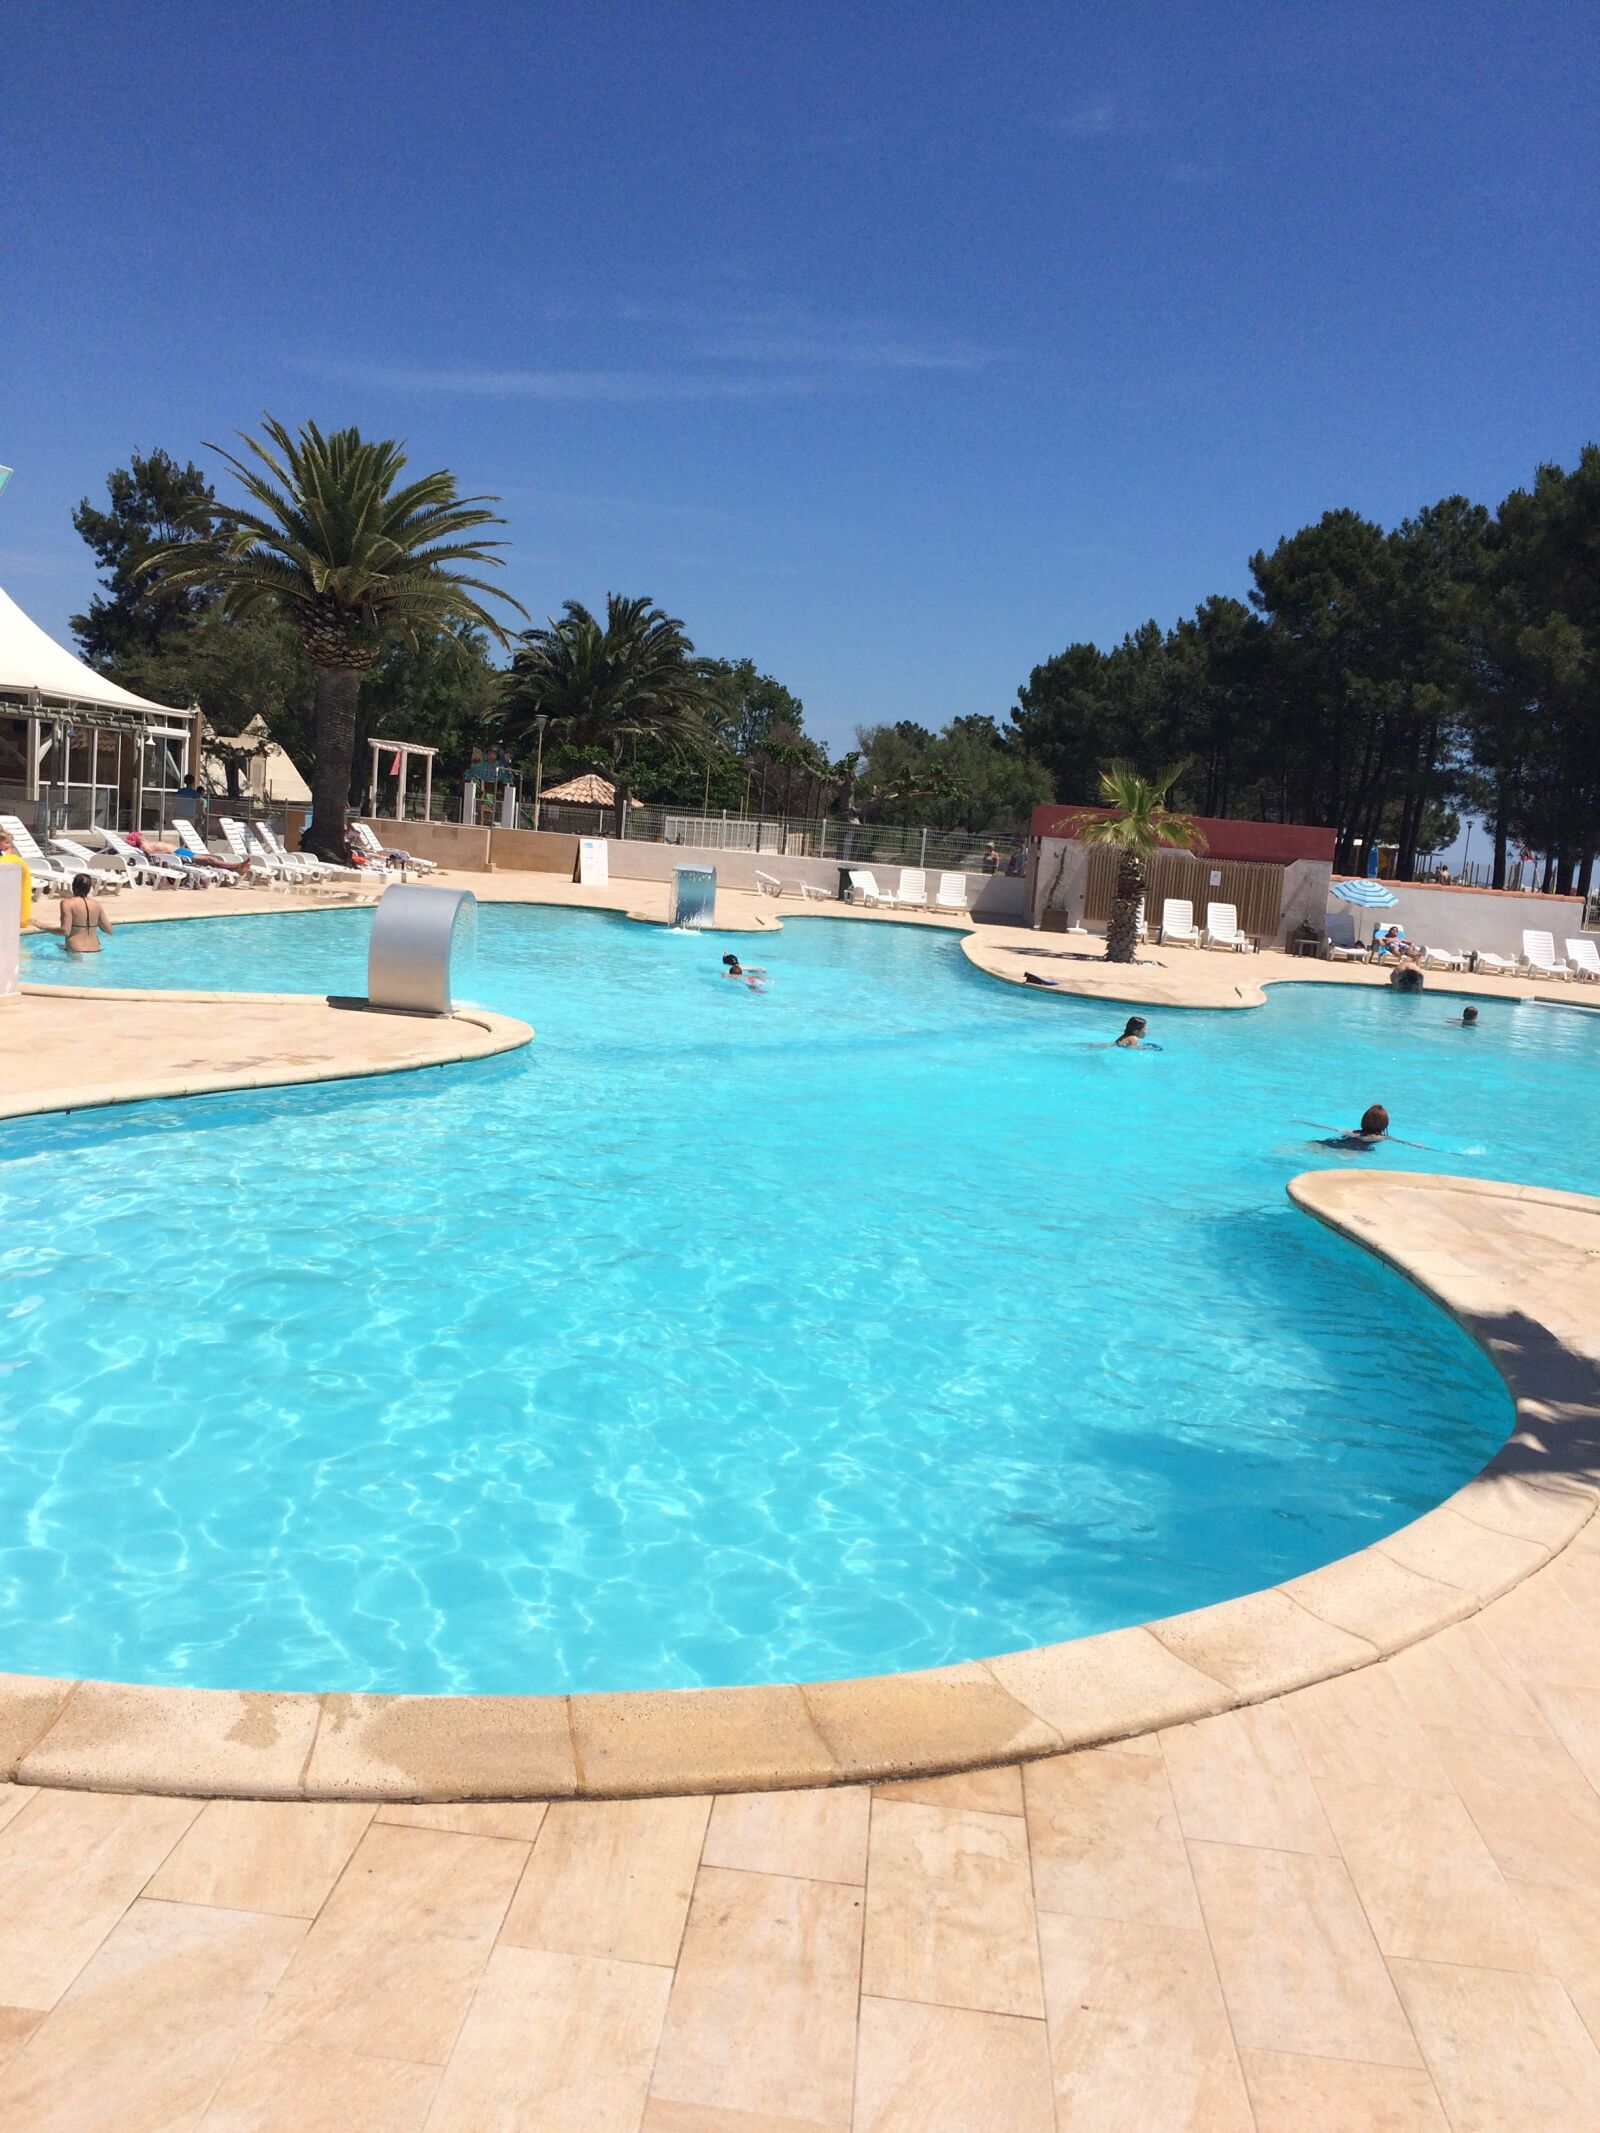 Apple iPhone 5s sample photo. Swimming pool, camping, nature photography